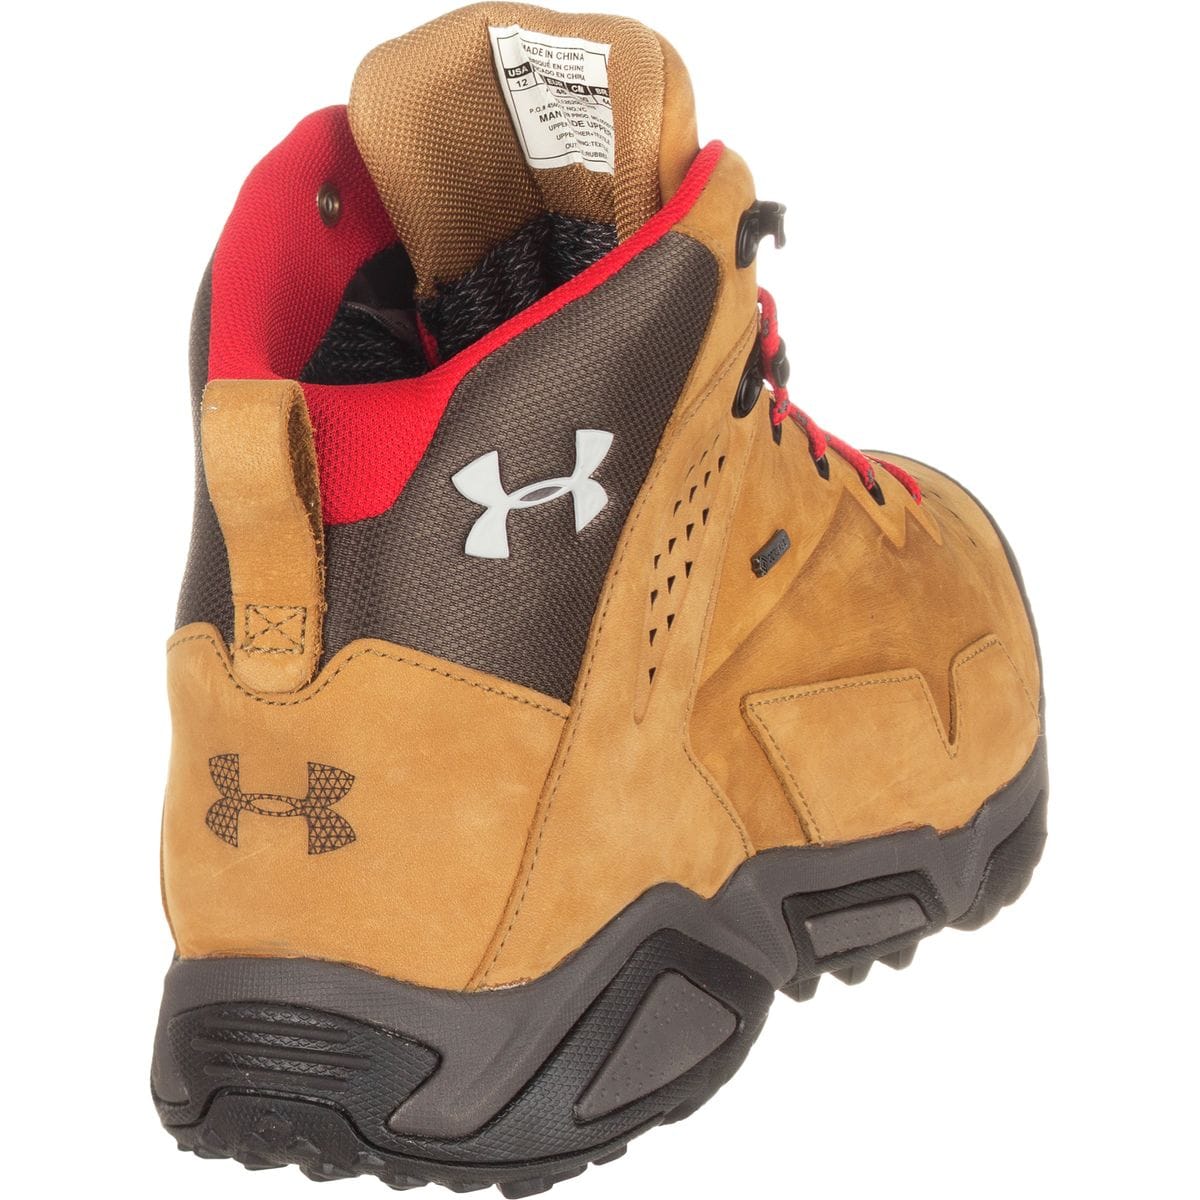 Under Armour Tabor Ridge Leather Hiking Boot - Men's -